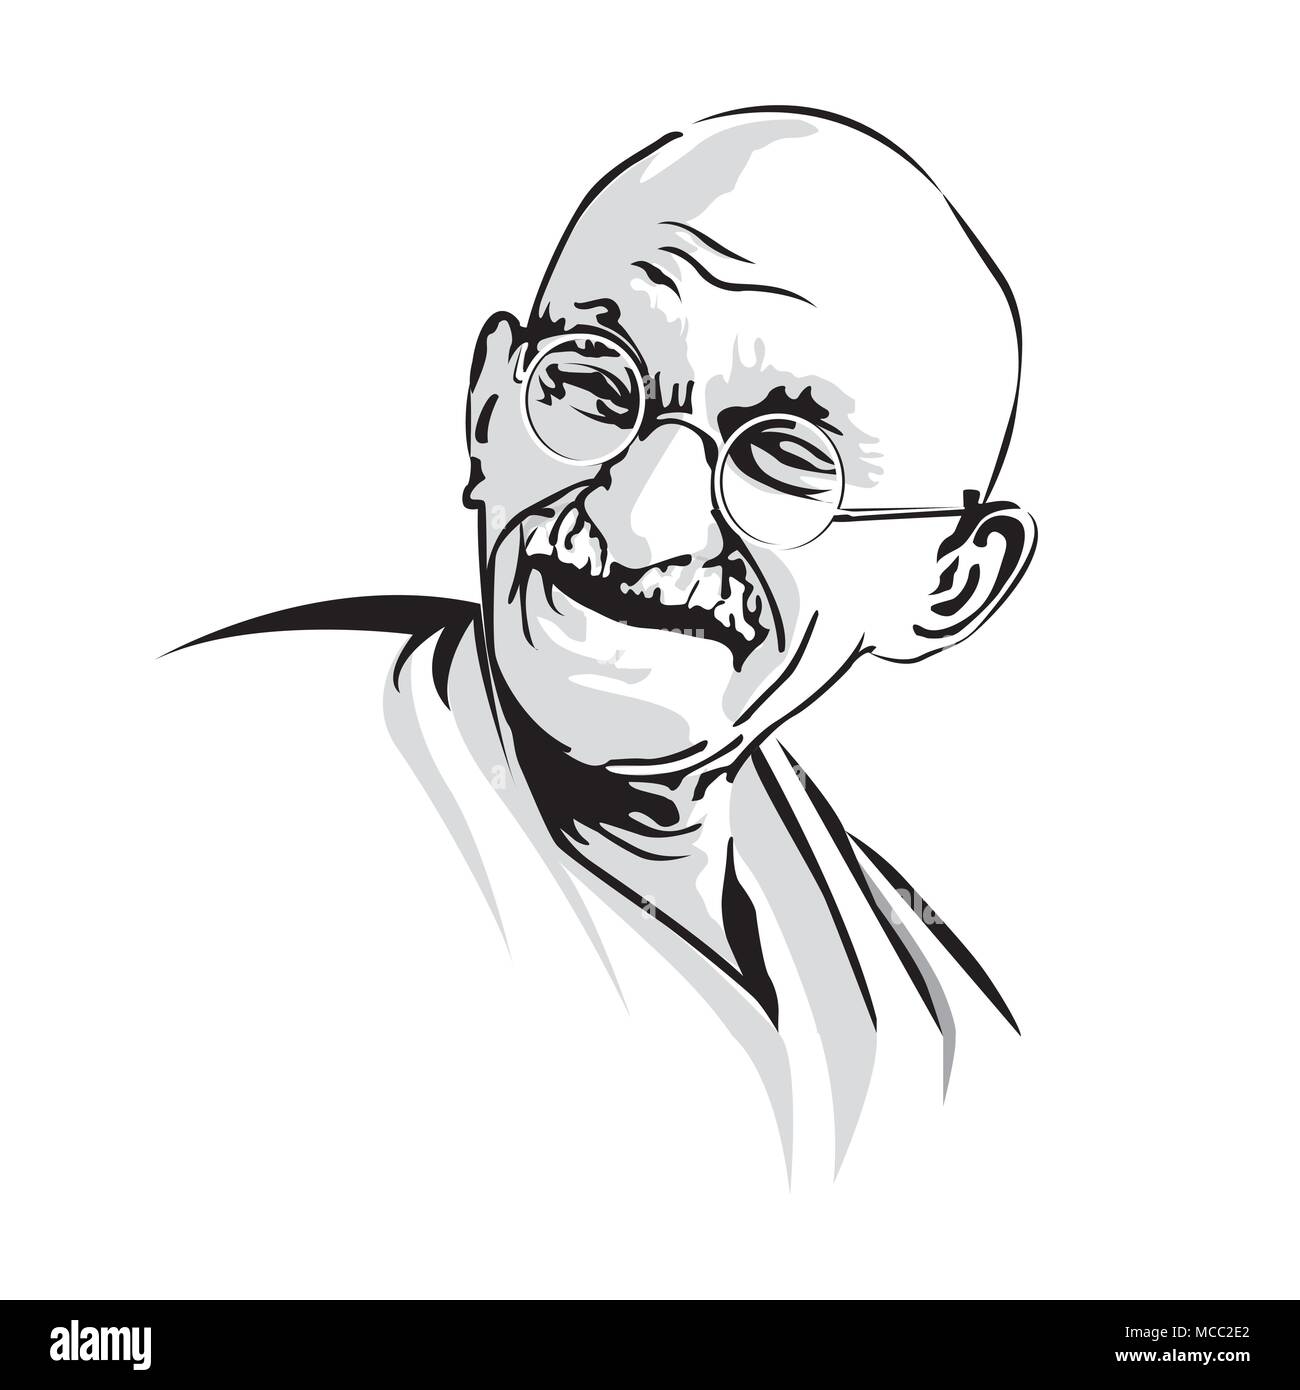 gandhiji drawing easy.Oct 2 drawing.gandhi jayanti drawing.how to draw  gandhiji.draw mahatma gandhi | Real-Time YouTube Video View Count |  SocialCounts.org